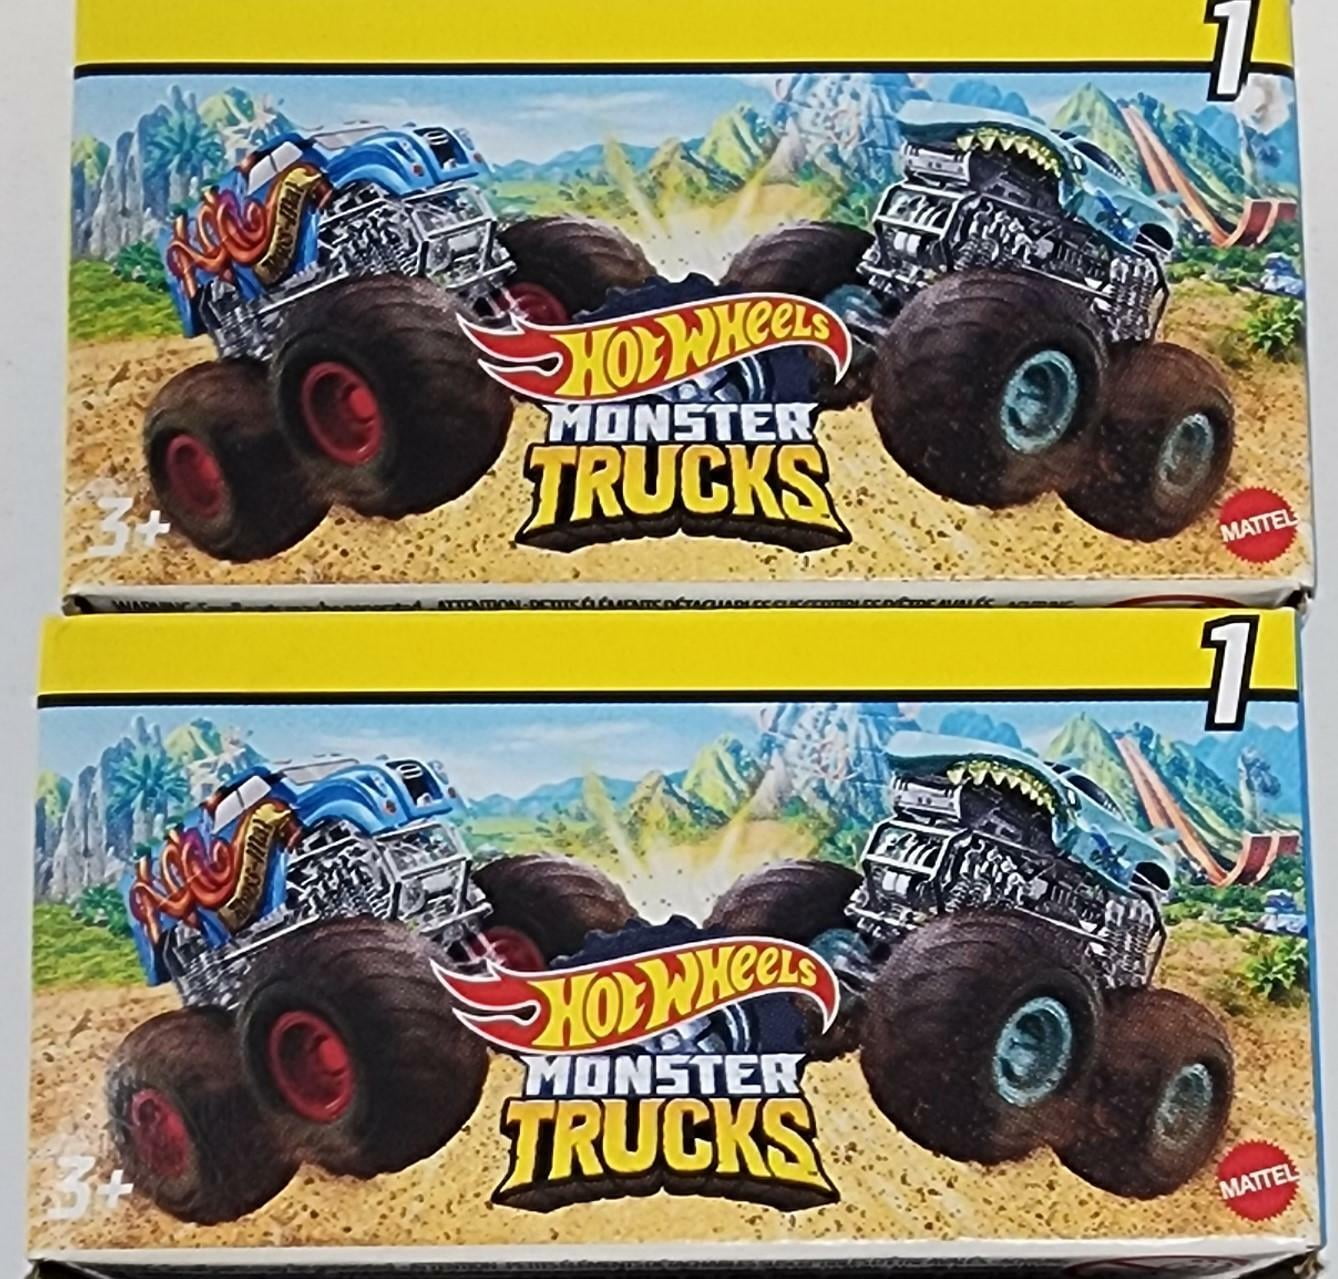 Movie truck from the upcoming Monster Trucks Movie franchise. We